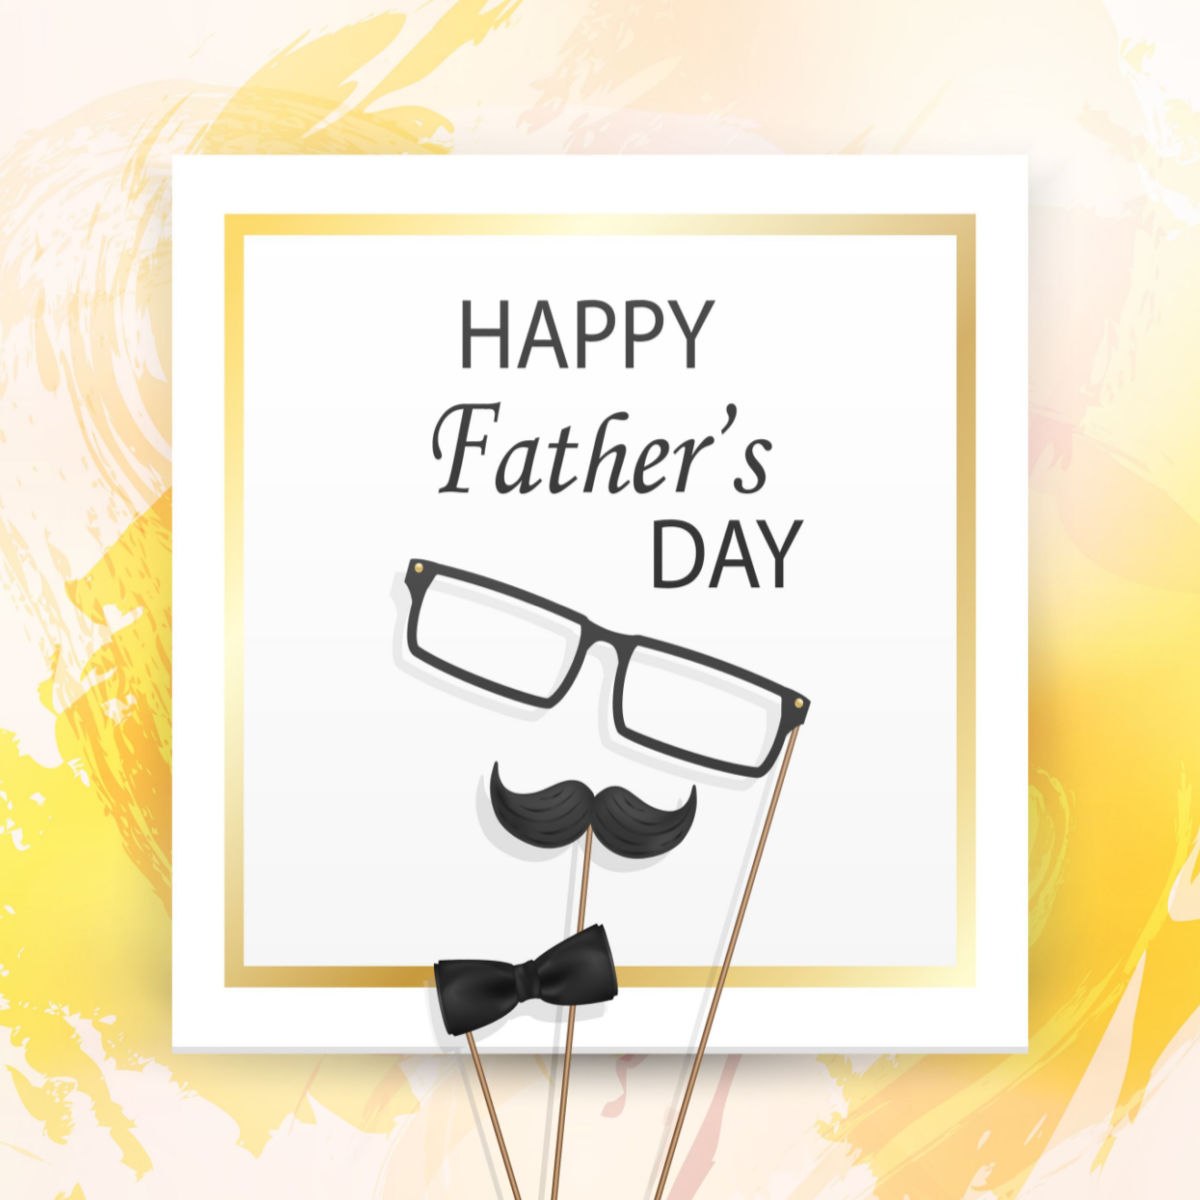 A white paper that reads "Happy Father's Day" in various fonts on it, with glasses on a stick, a mustache on a stick and bow tie on a stick below it, all surrounded by yellow paint swipes.